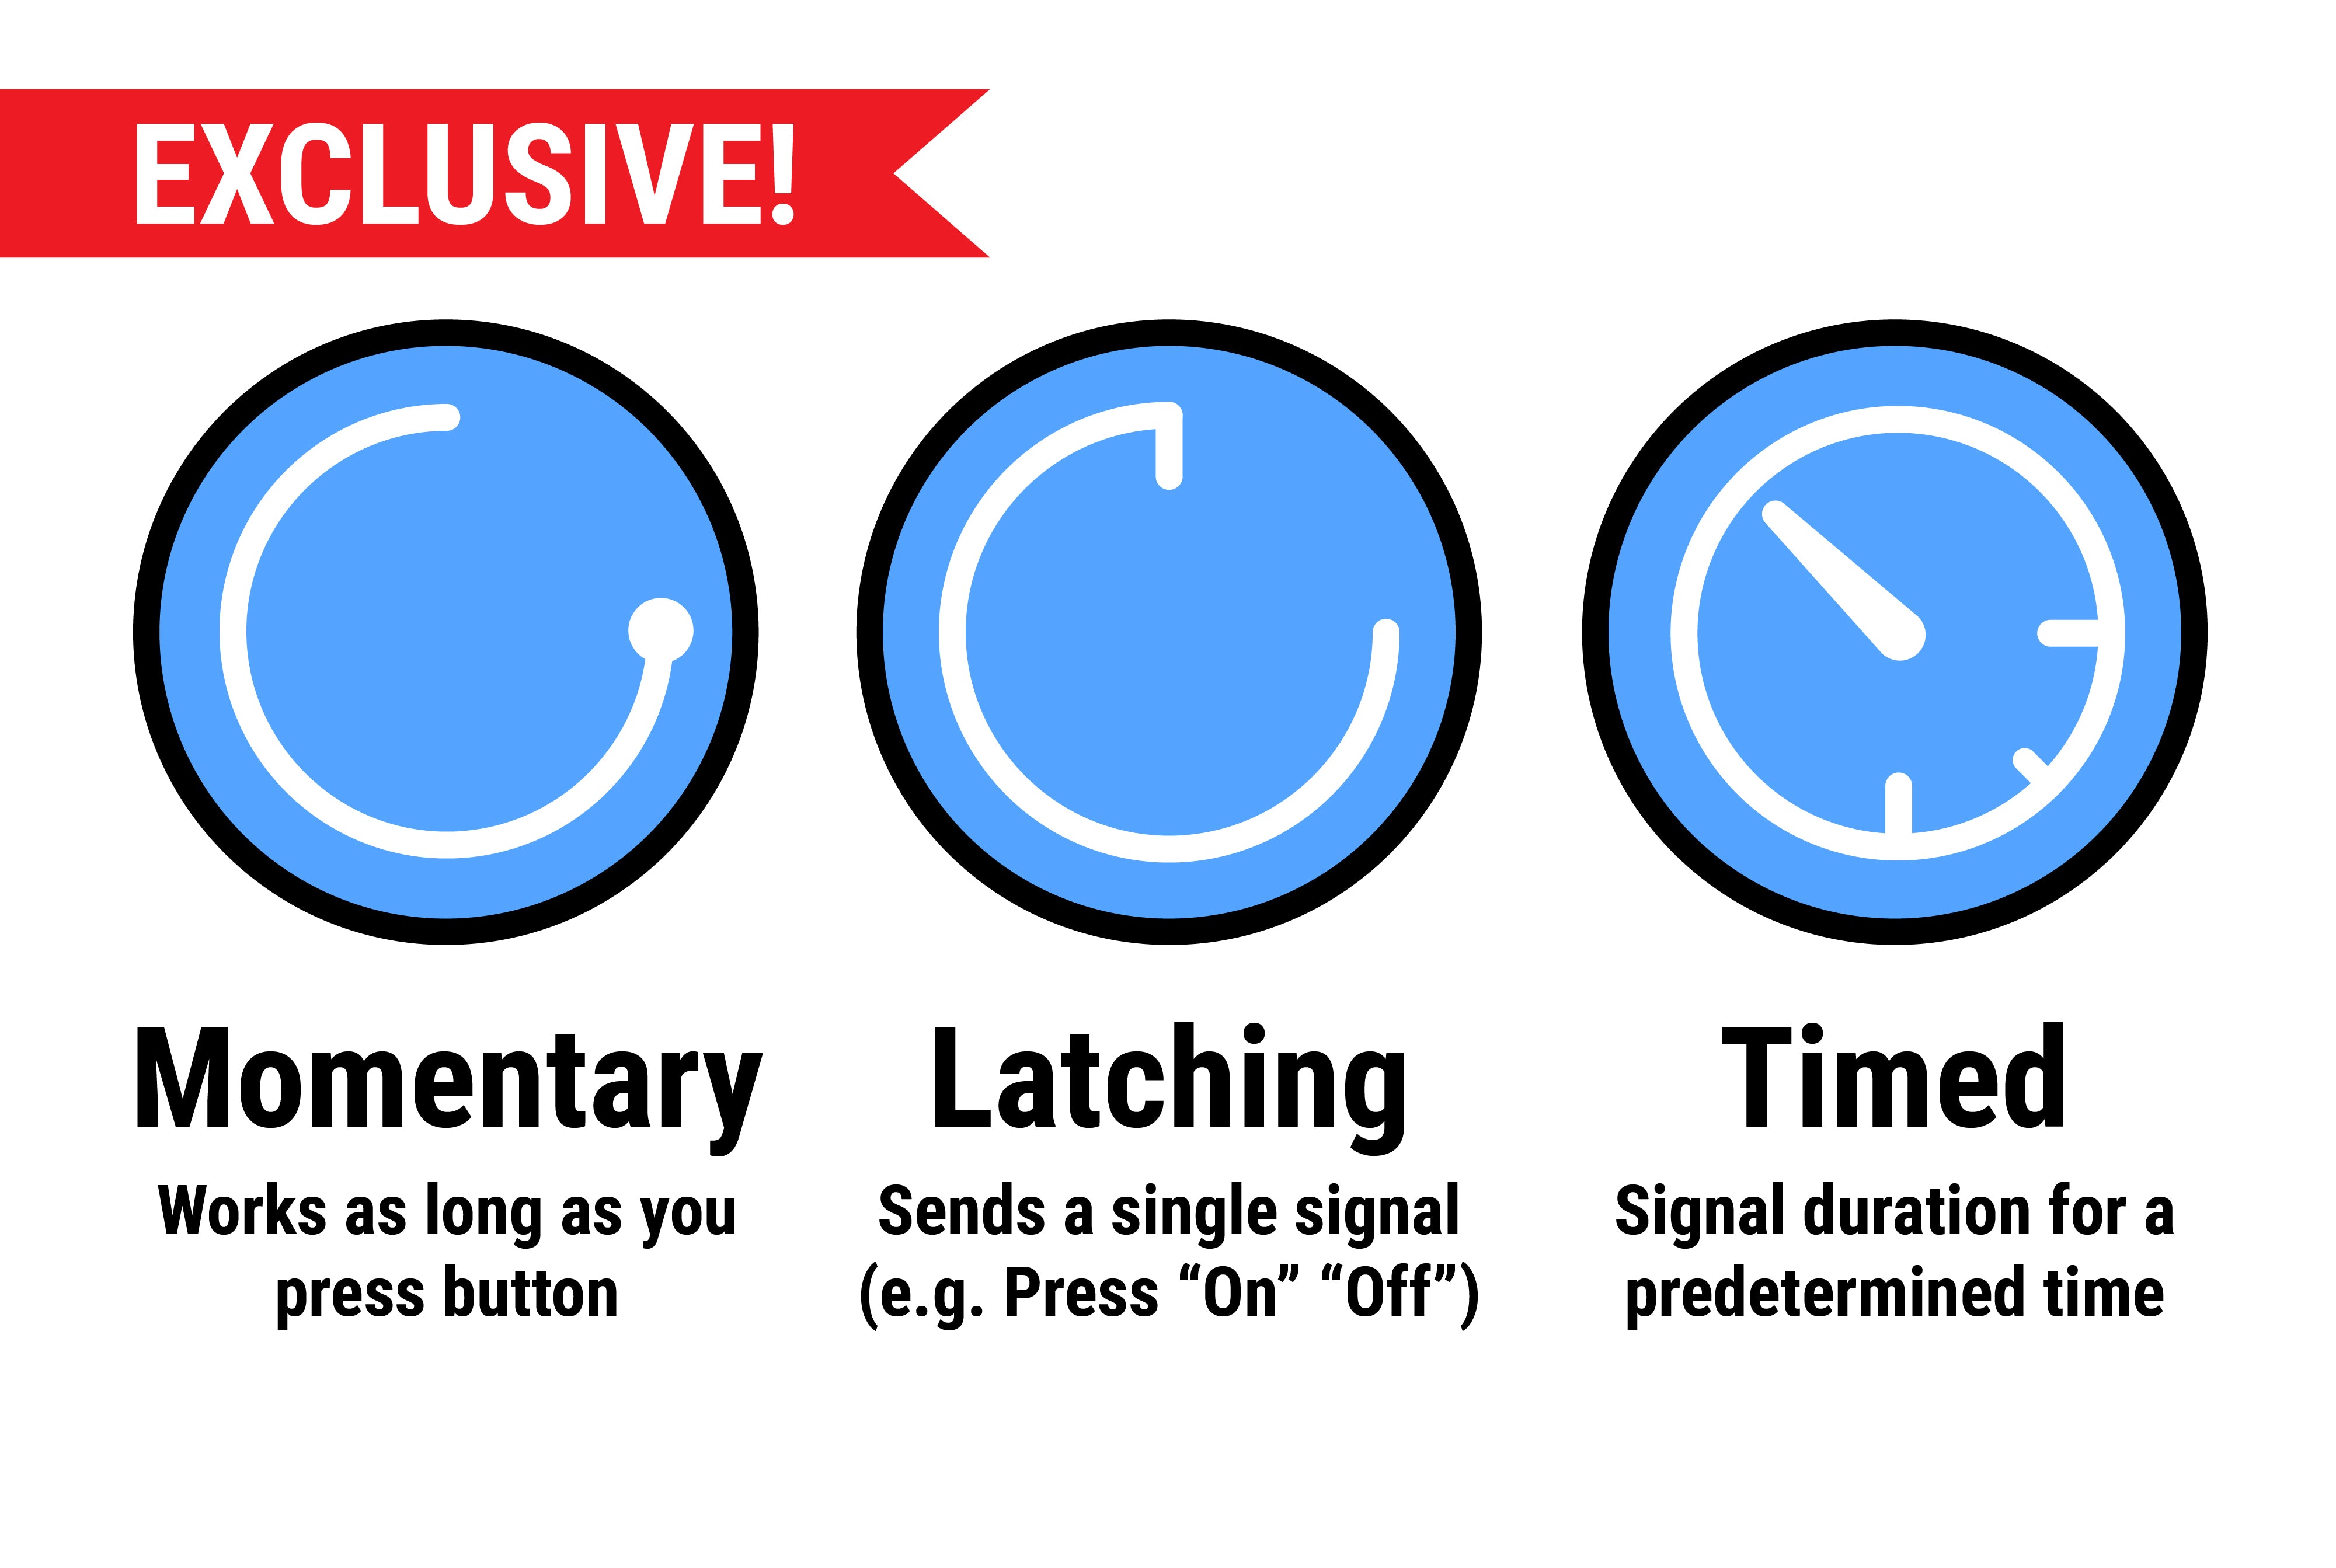 Exclusive! Momentary, Latching or Timed